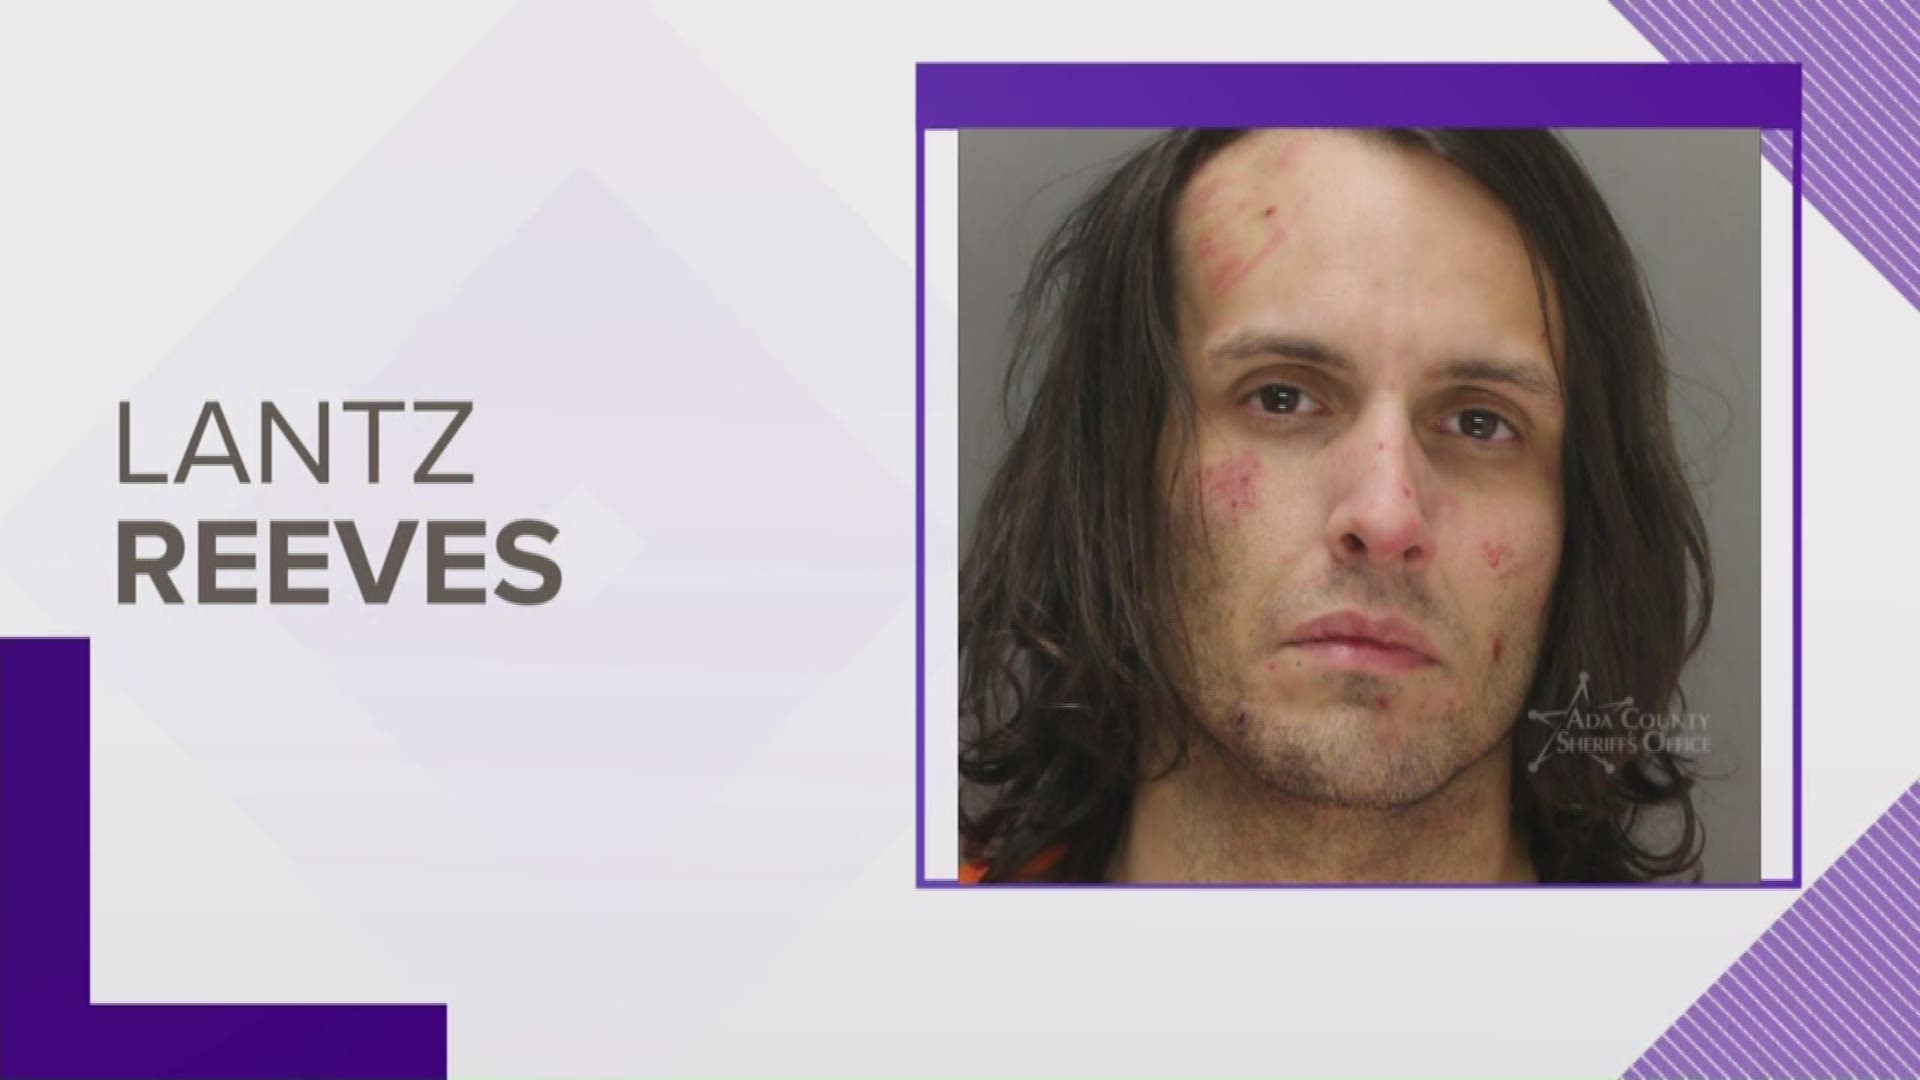 Boise Police say 31-year-old Lantz Reeves fled from police in a vehicle before he crashed into a utility box, then officers chased him on foot when they arrived.